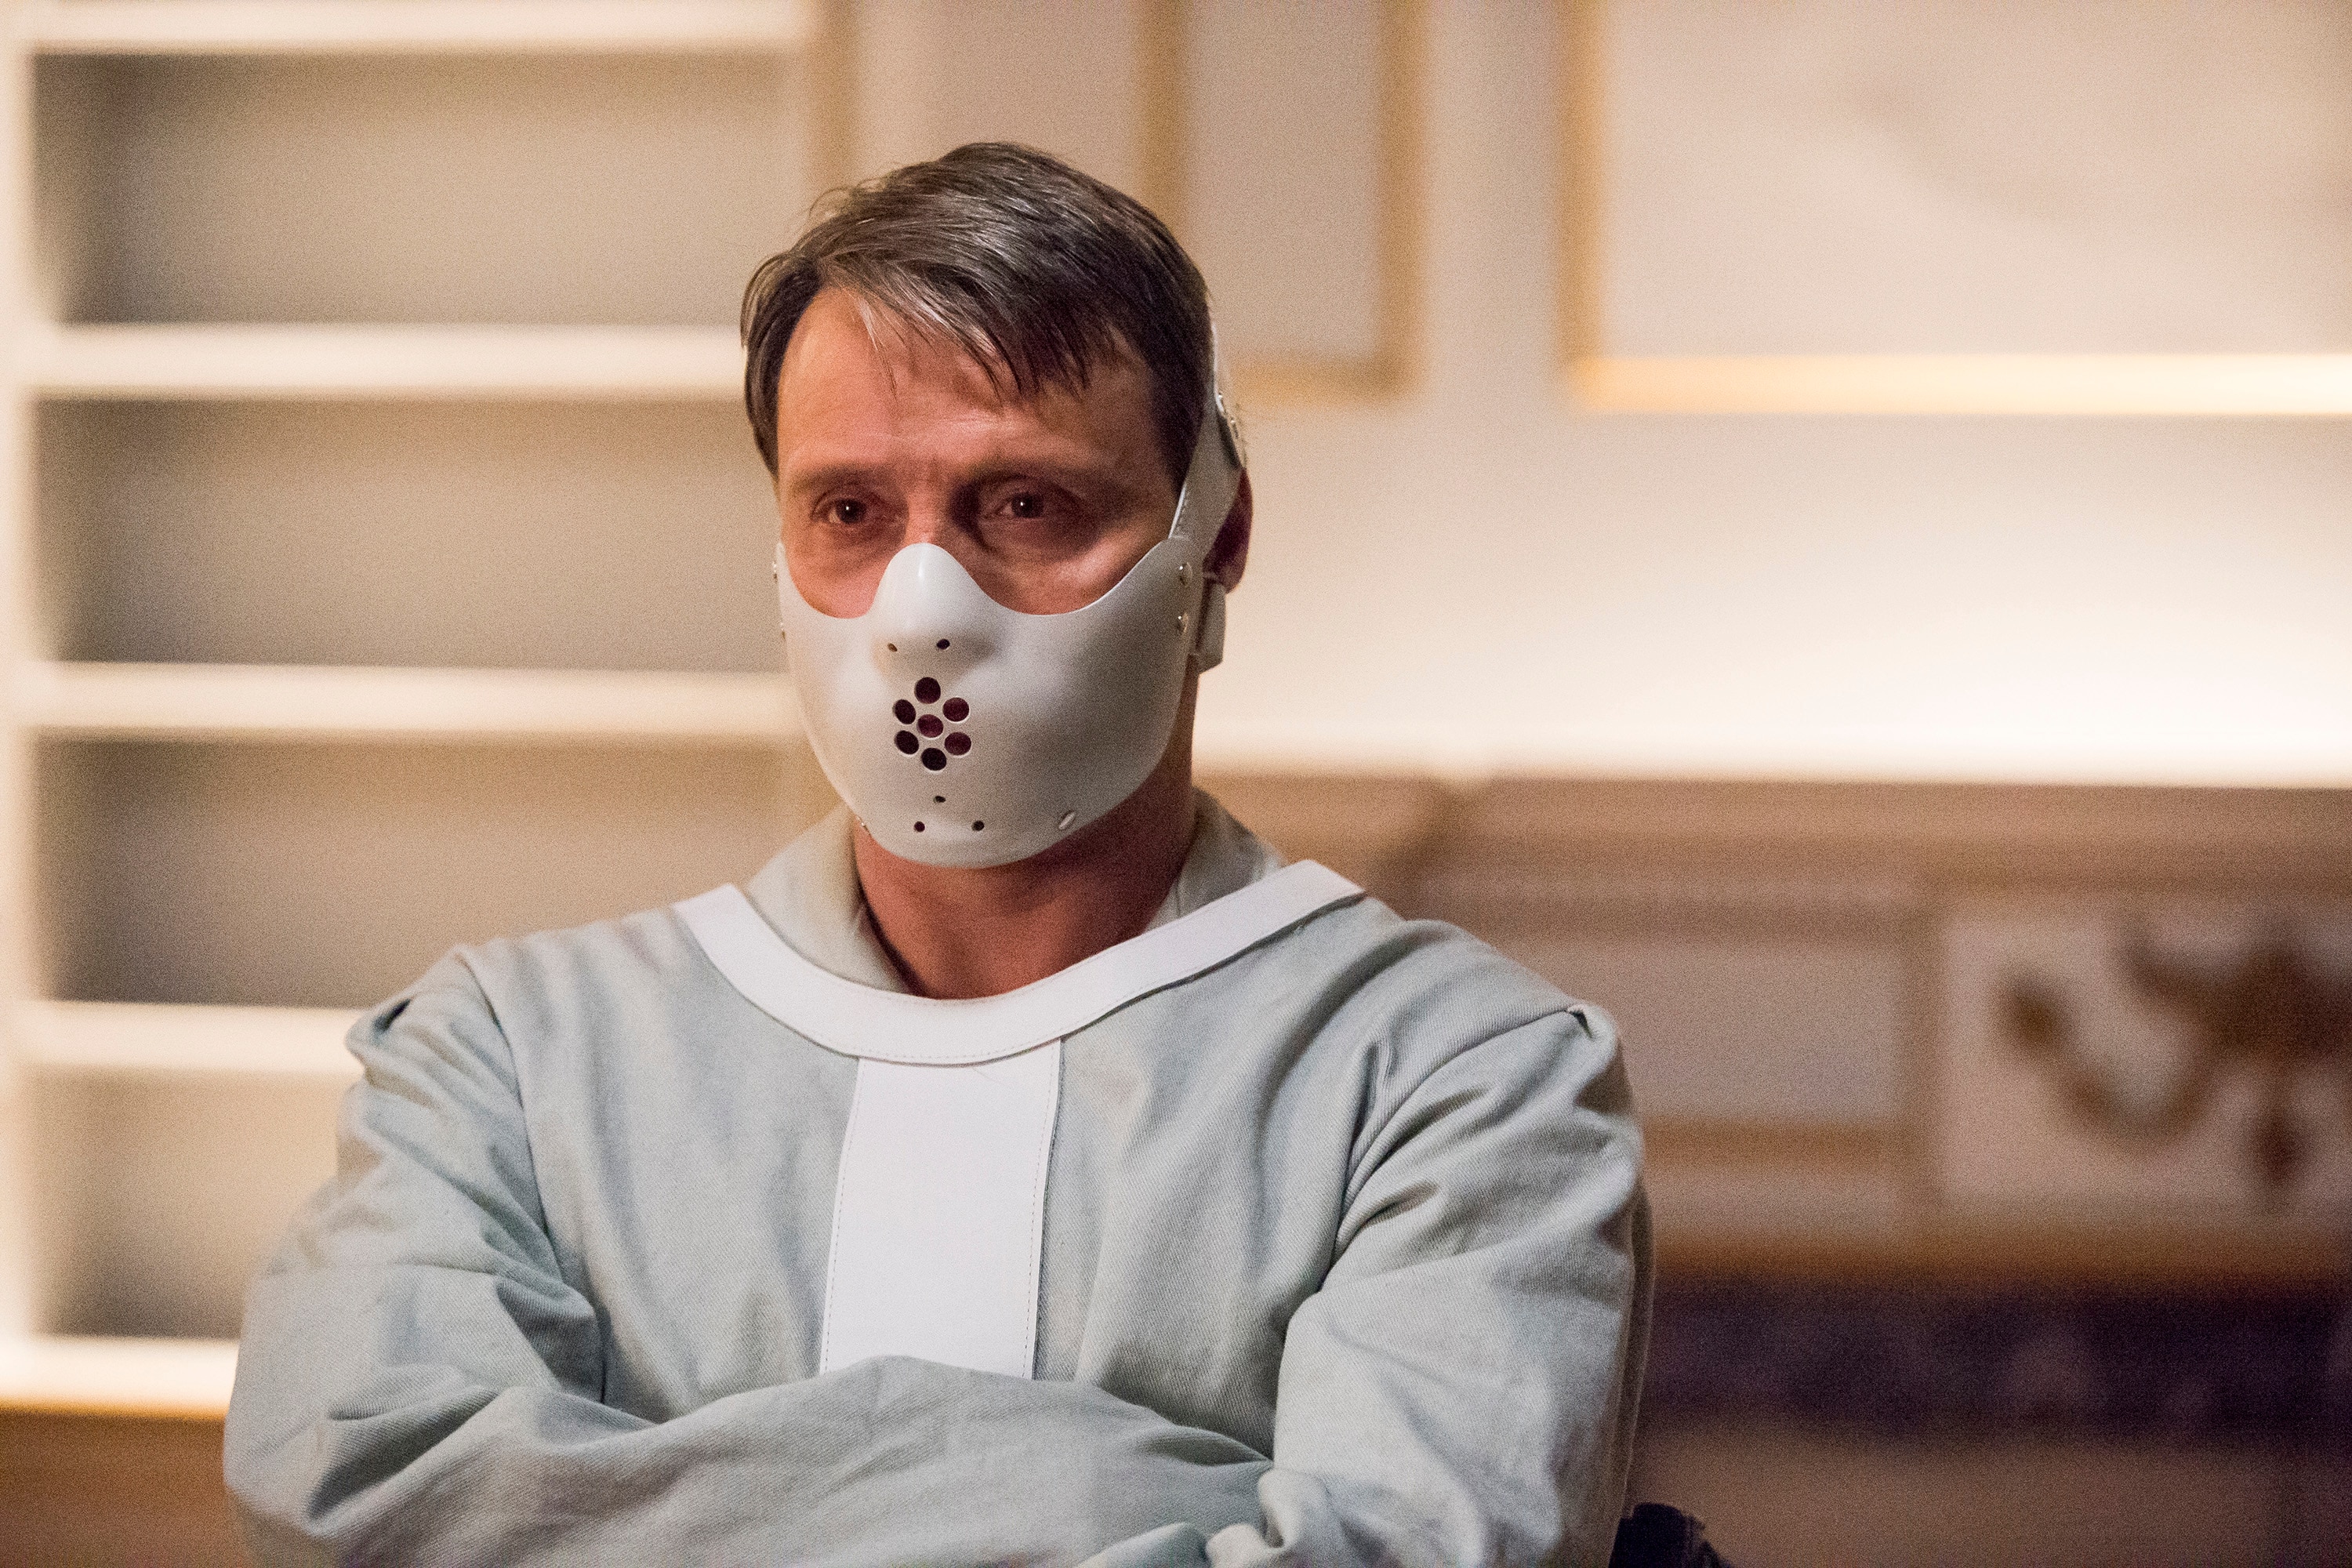 Hannibal: Photos from "The Wrath of the Lamb" Photo: 2467486 - NBC.com